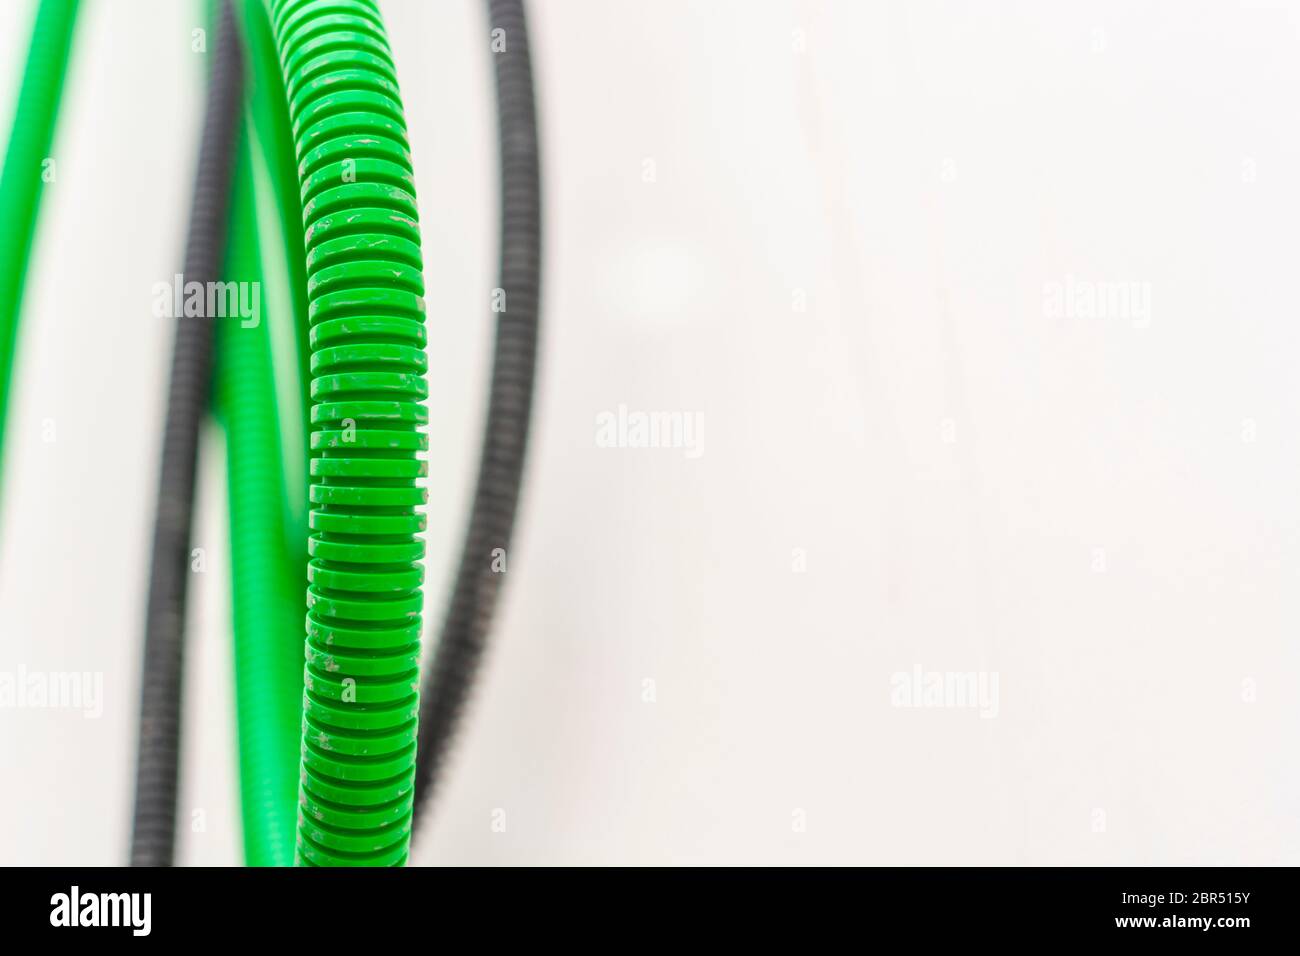 Black and green corrugated bellow conduit tube for electrical wiring Stock Photo